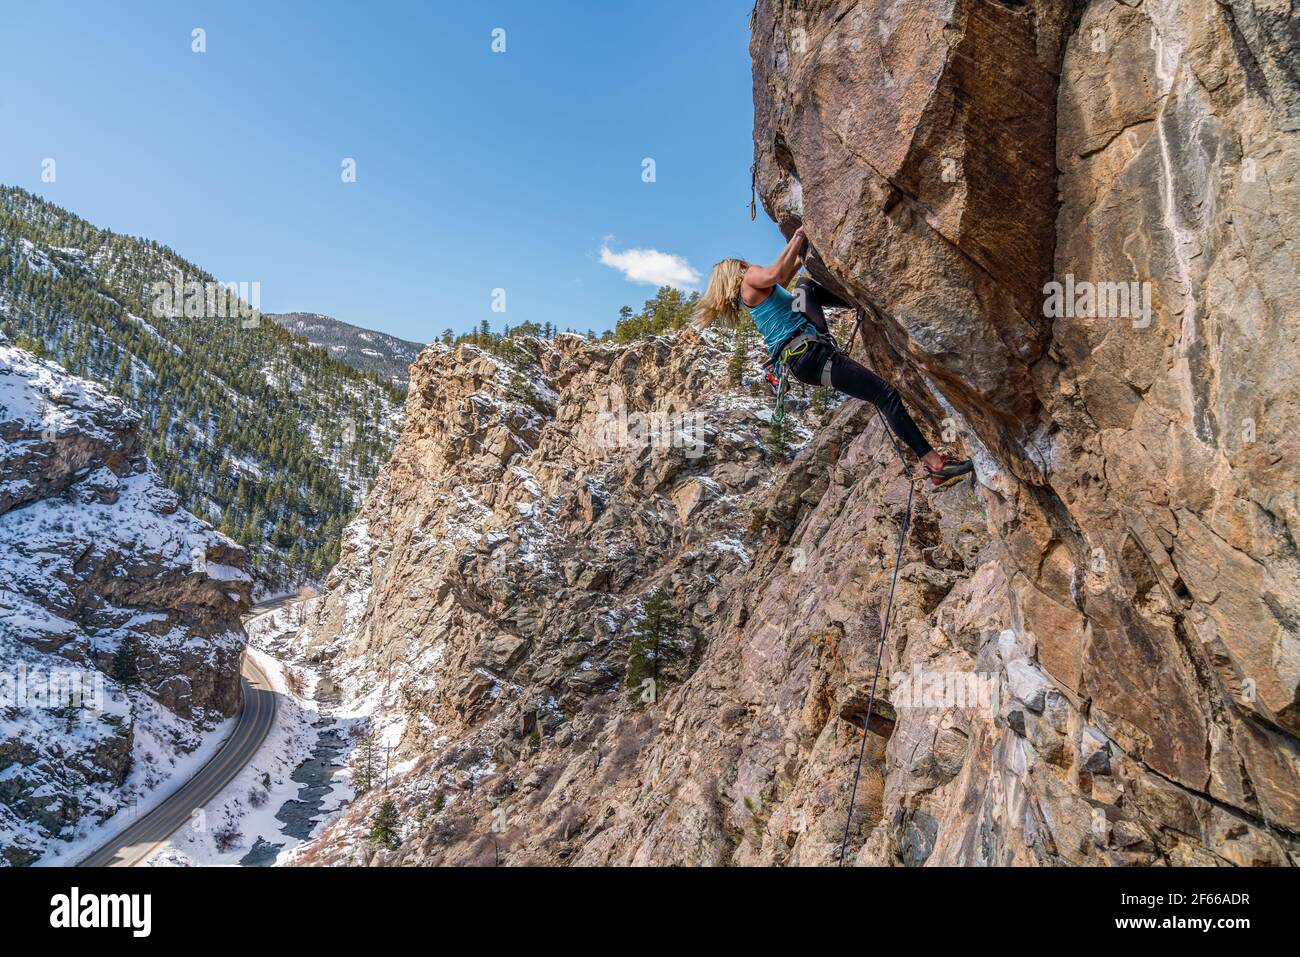 3/27/21 Golden, Colorado - A woman works out the moves on a steep rock climb in Clear Creek Canyon. Stock Photo